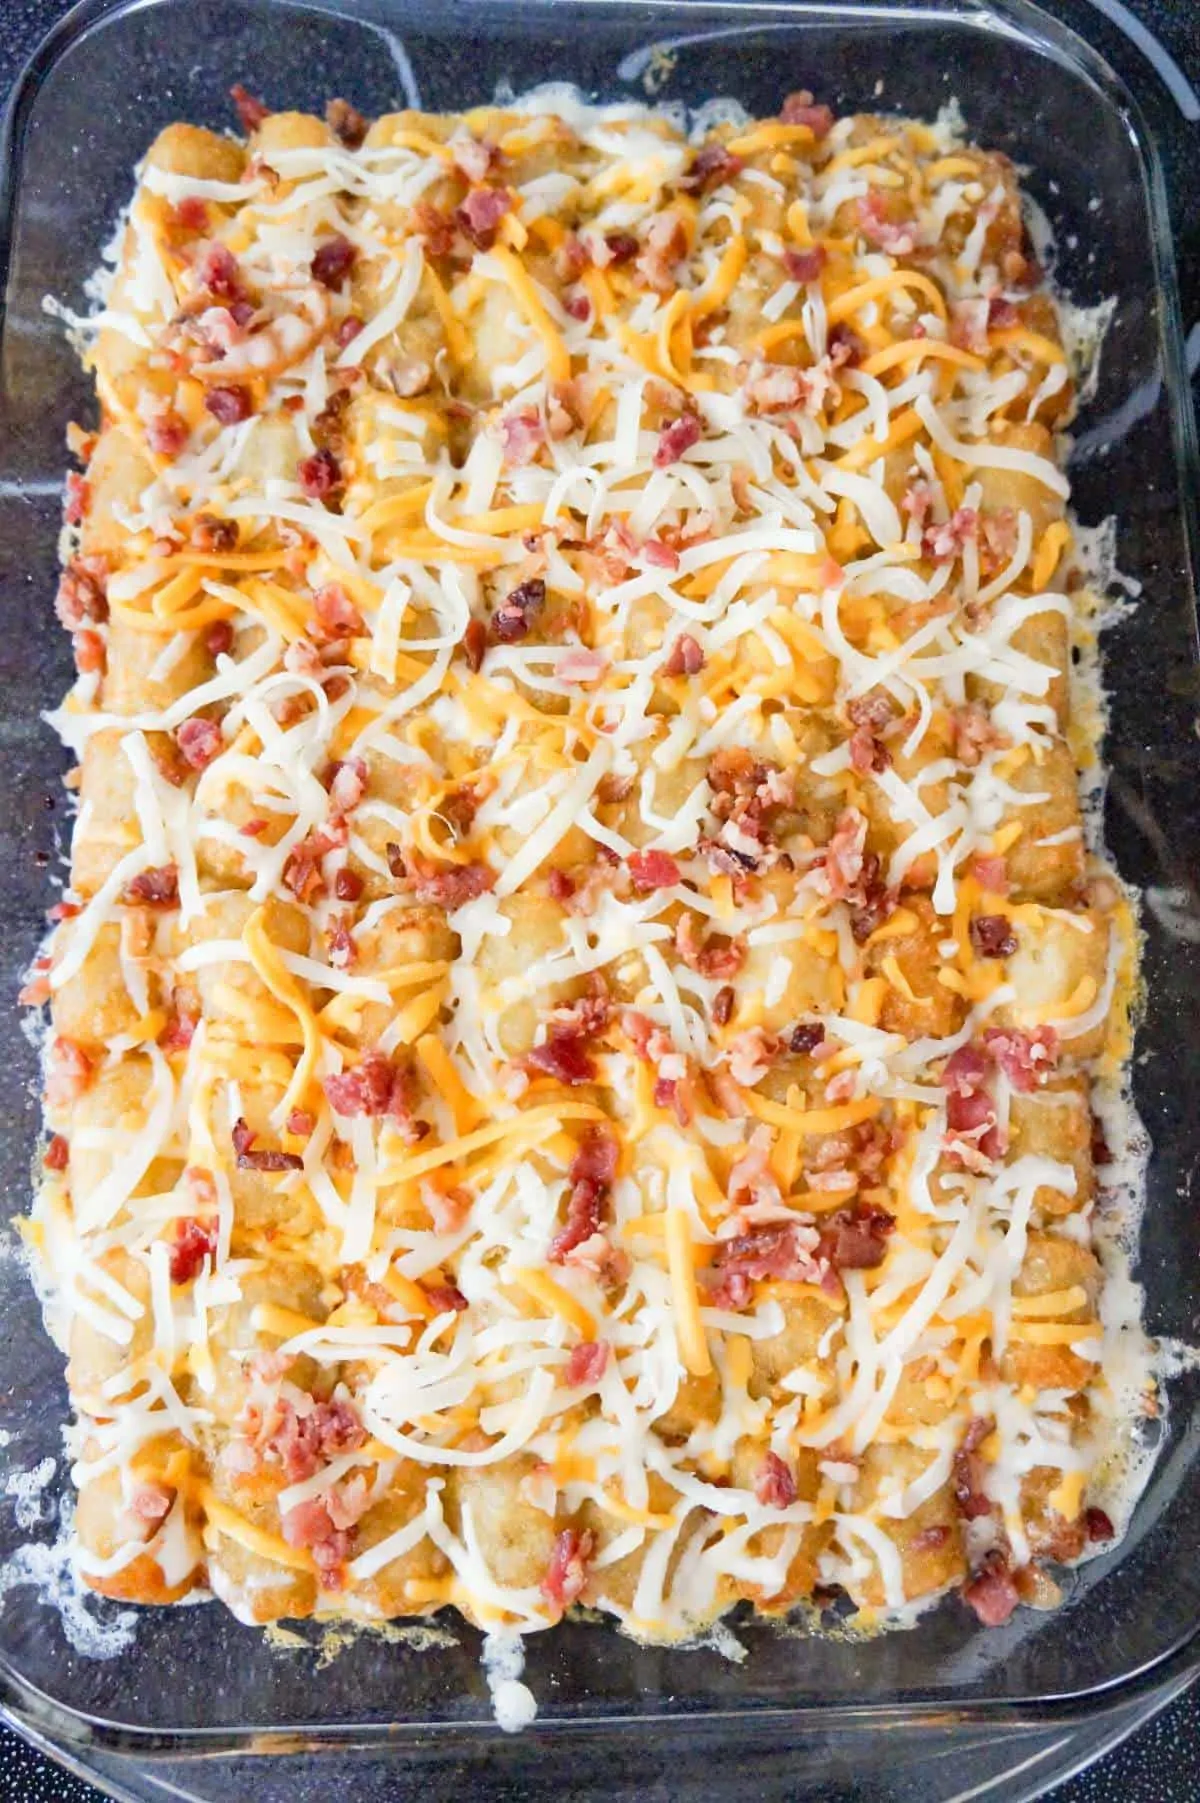 crumbled bacon and shredded cheese on top of tater tot casserole